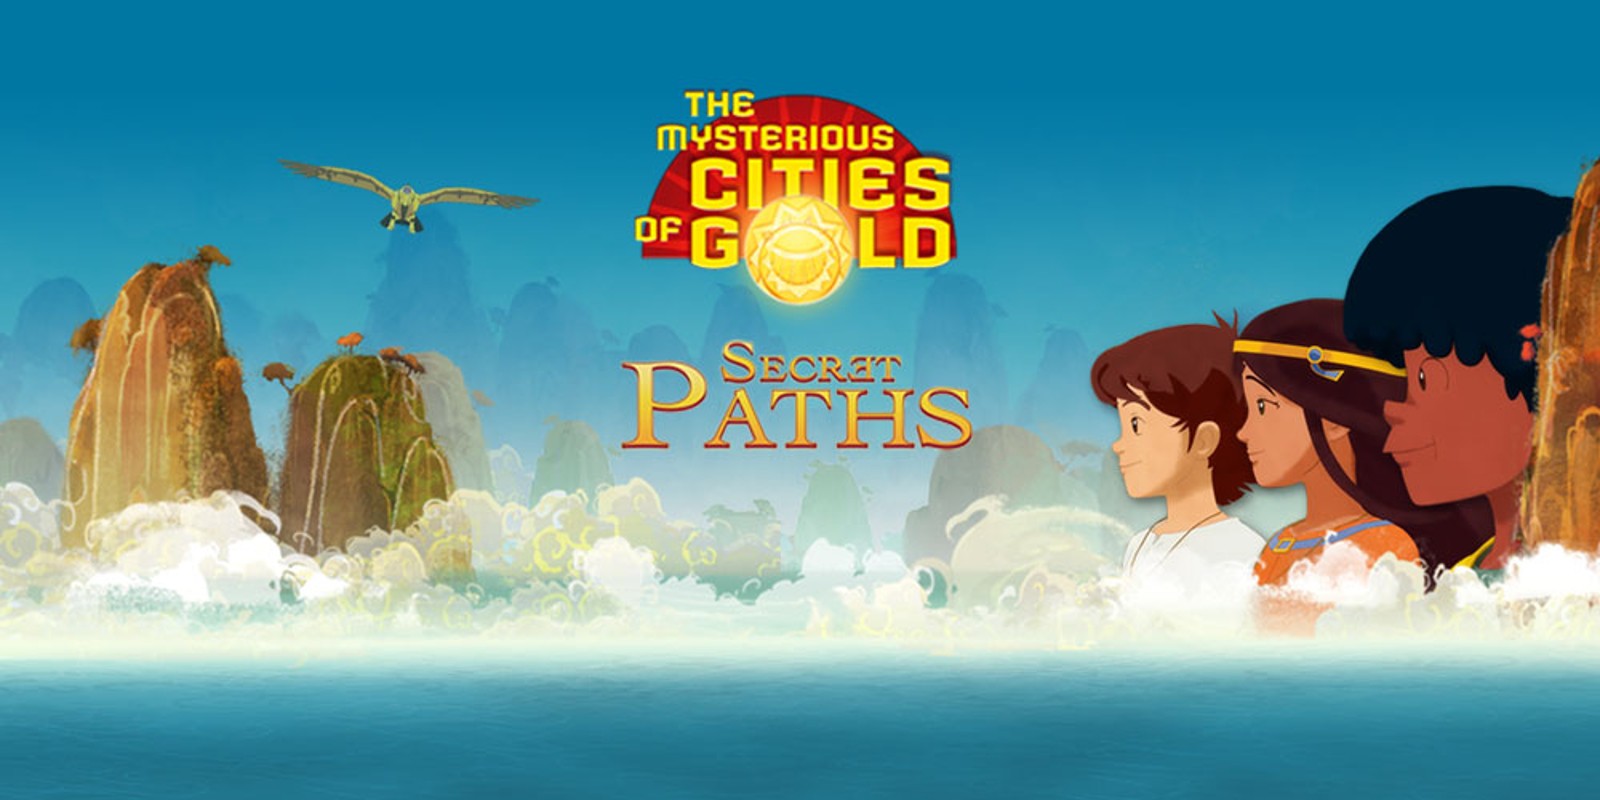 The Mysterious Cities of Gold Secret Paths